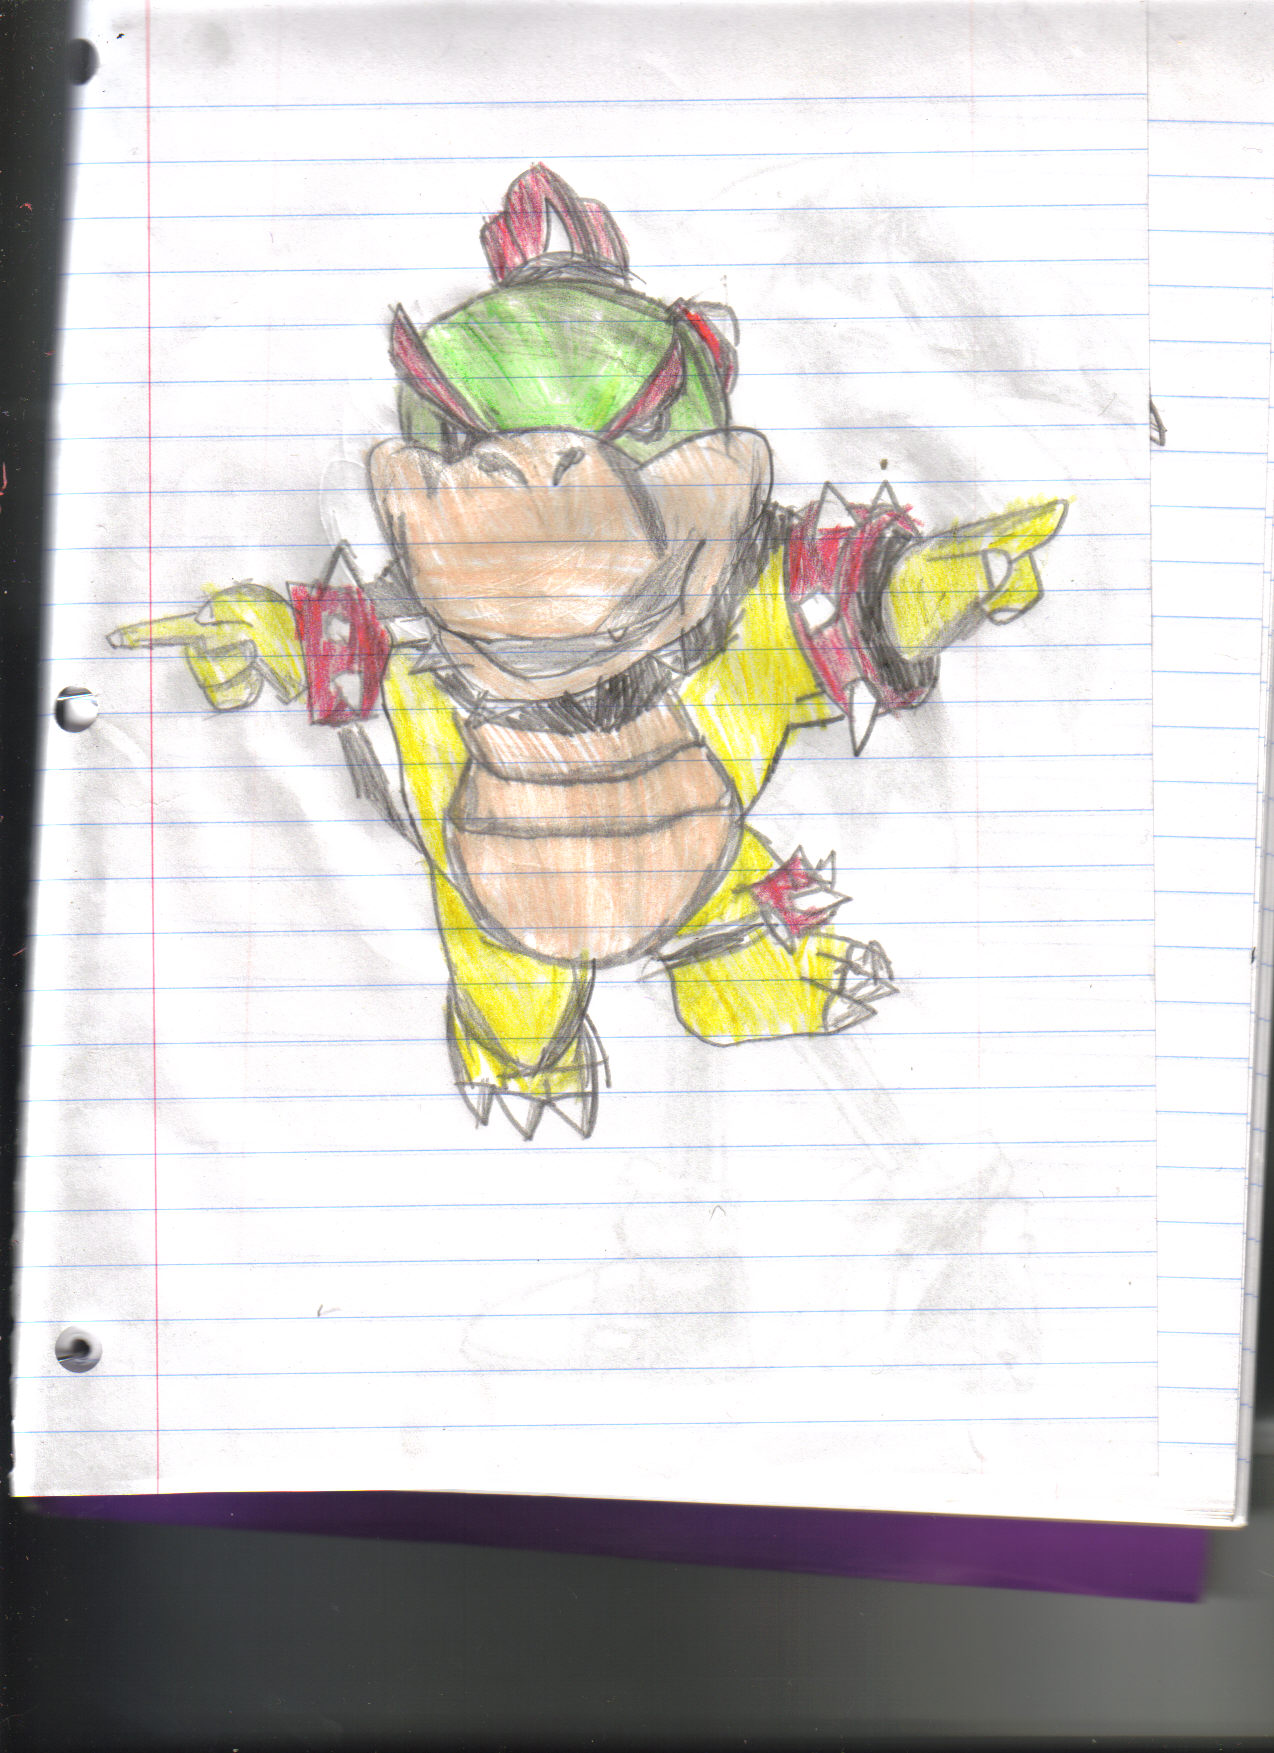 NEW SERIES:Mario strikers charged fanart 1:Bowser Jr. by sonicspeed619